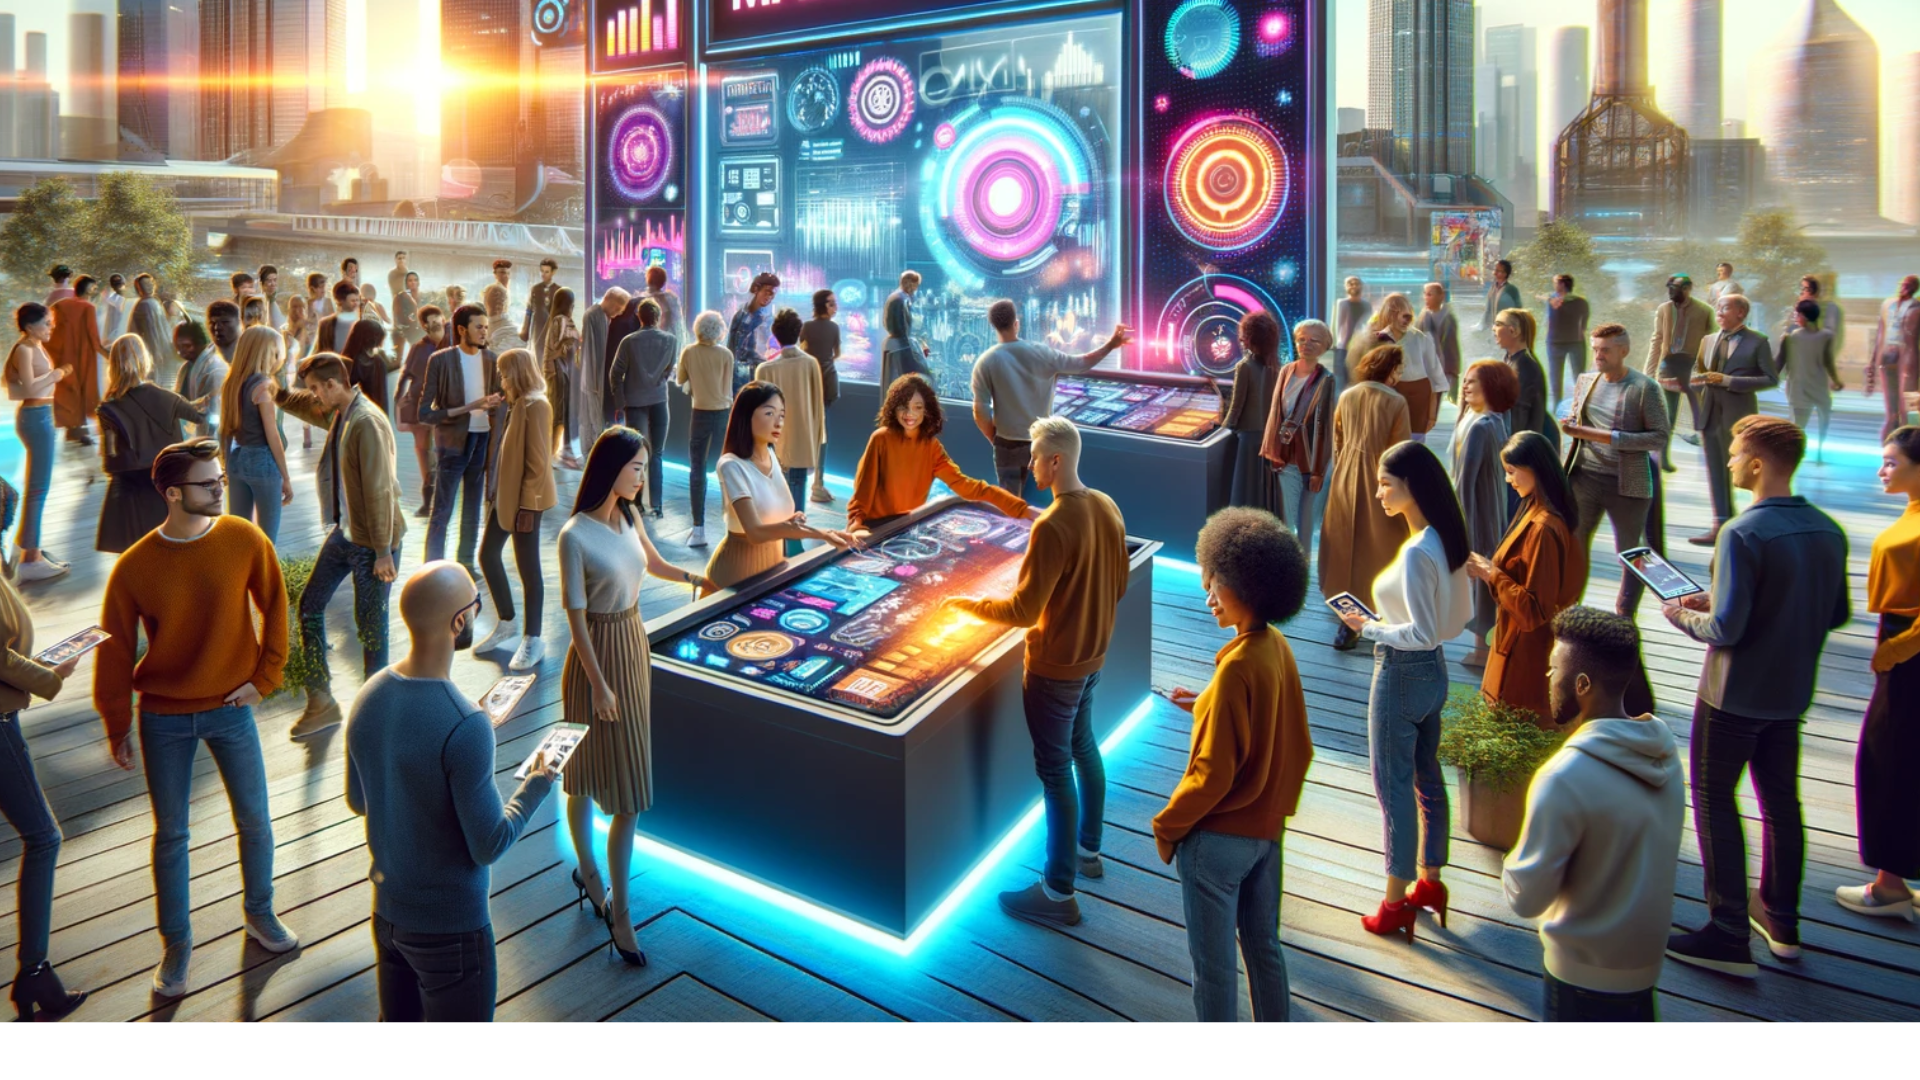 A setting where people are gathering, looking at a marketing activation and using temporary internet/wifi on screens and tablet like devices.